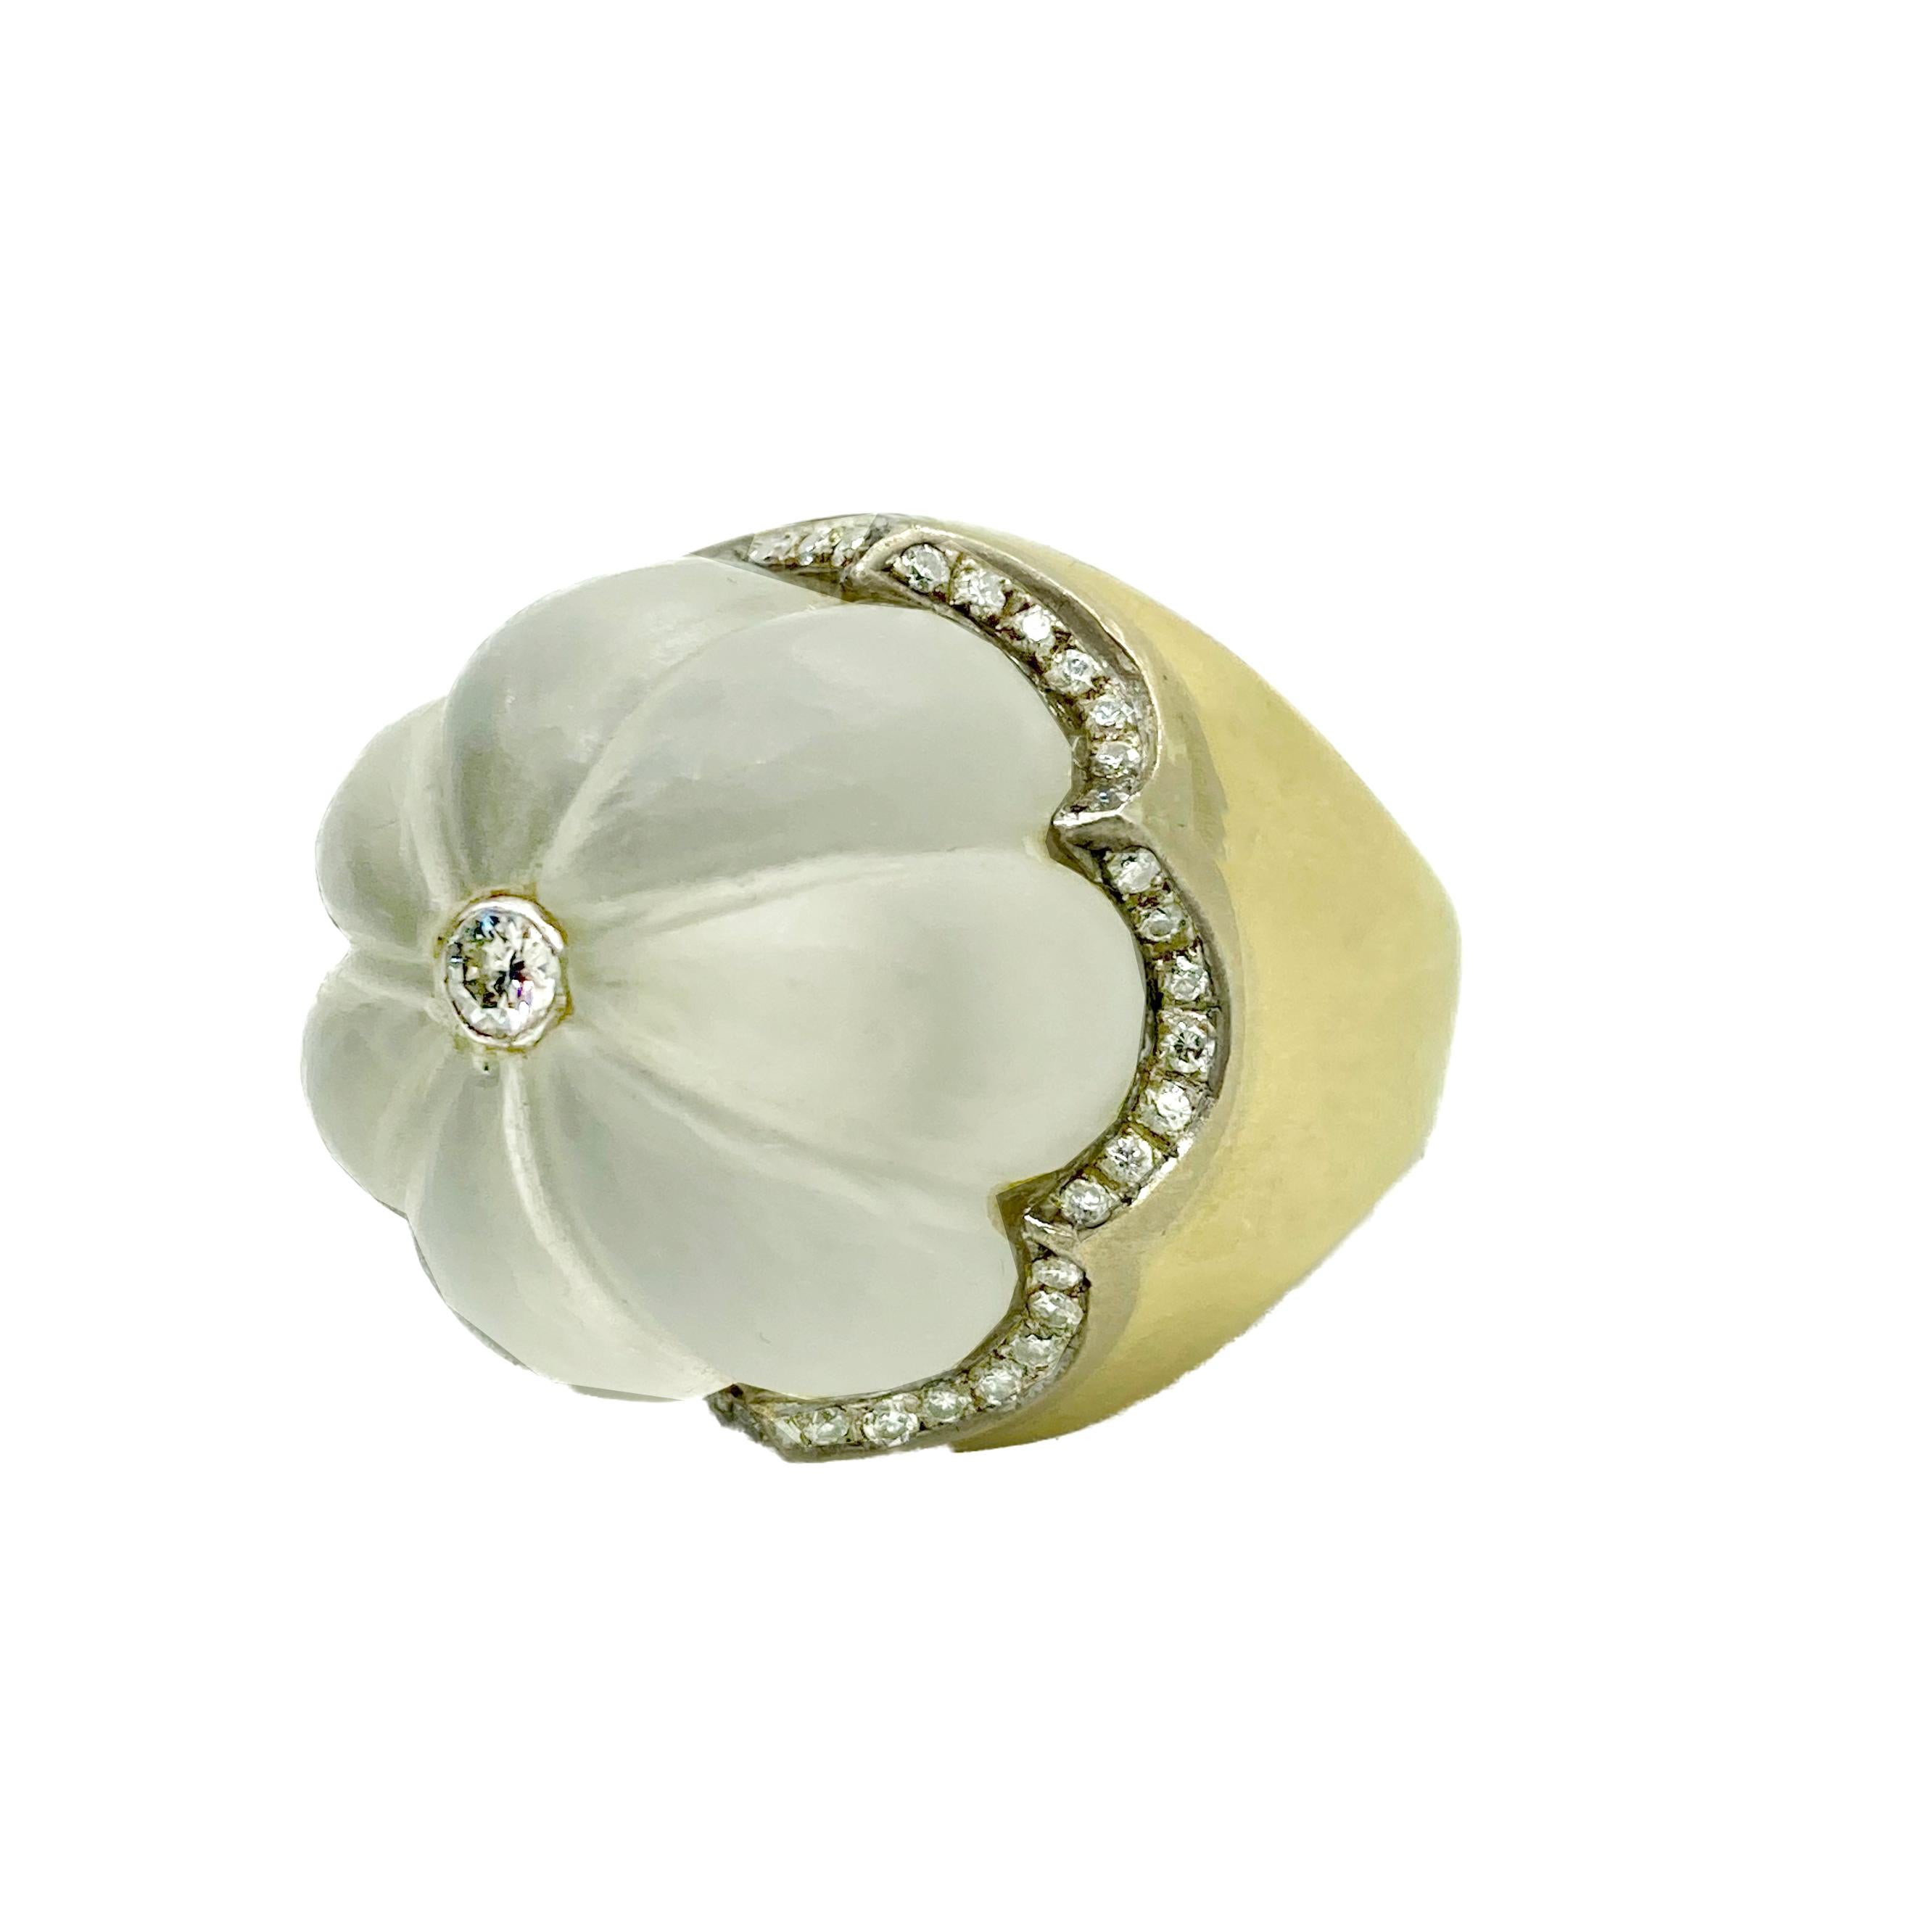 A retro fluted rock crystal and diamond dome 14 karat gold ring. Made in Italy, circa 1950s.